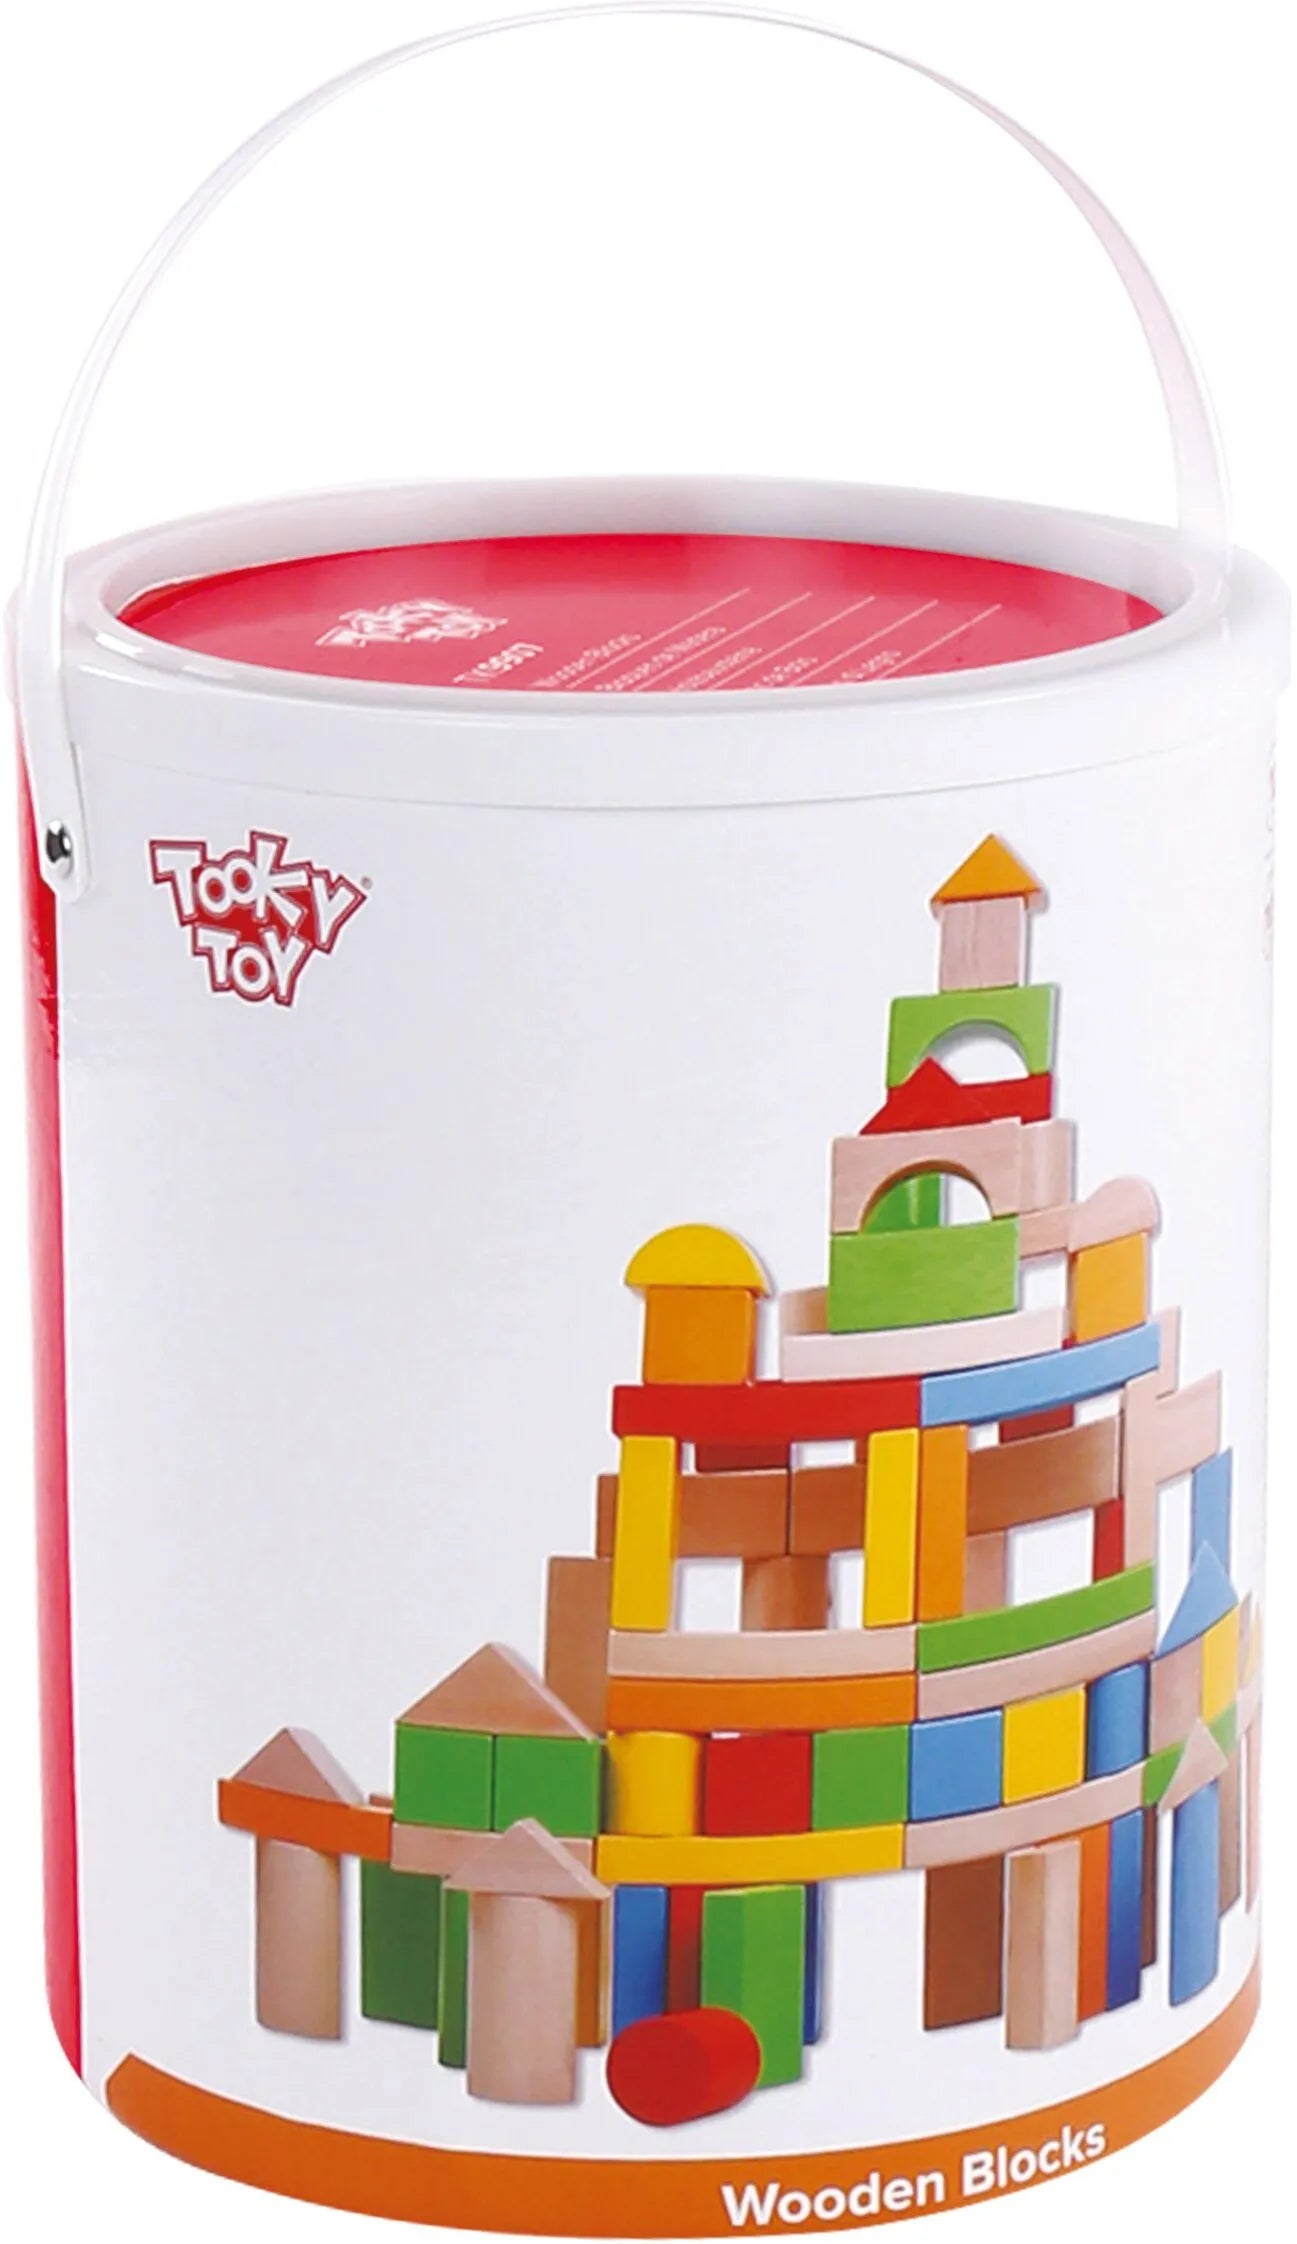 wooden construction toy - tooky toys - shop wooden playsets at the toy room